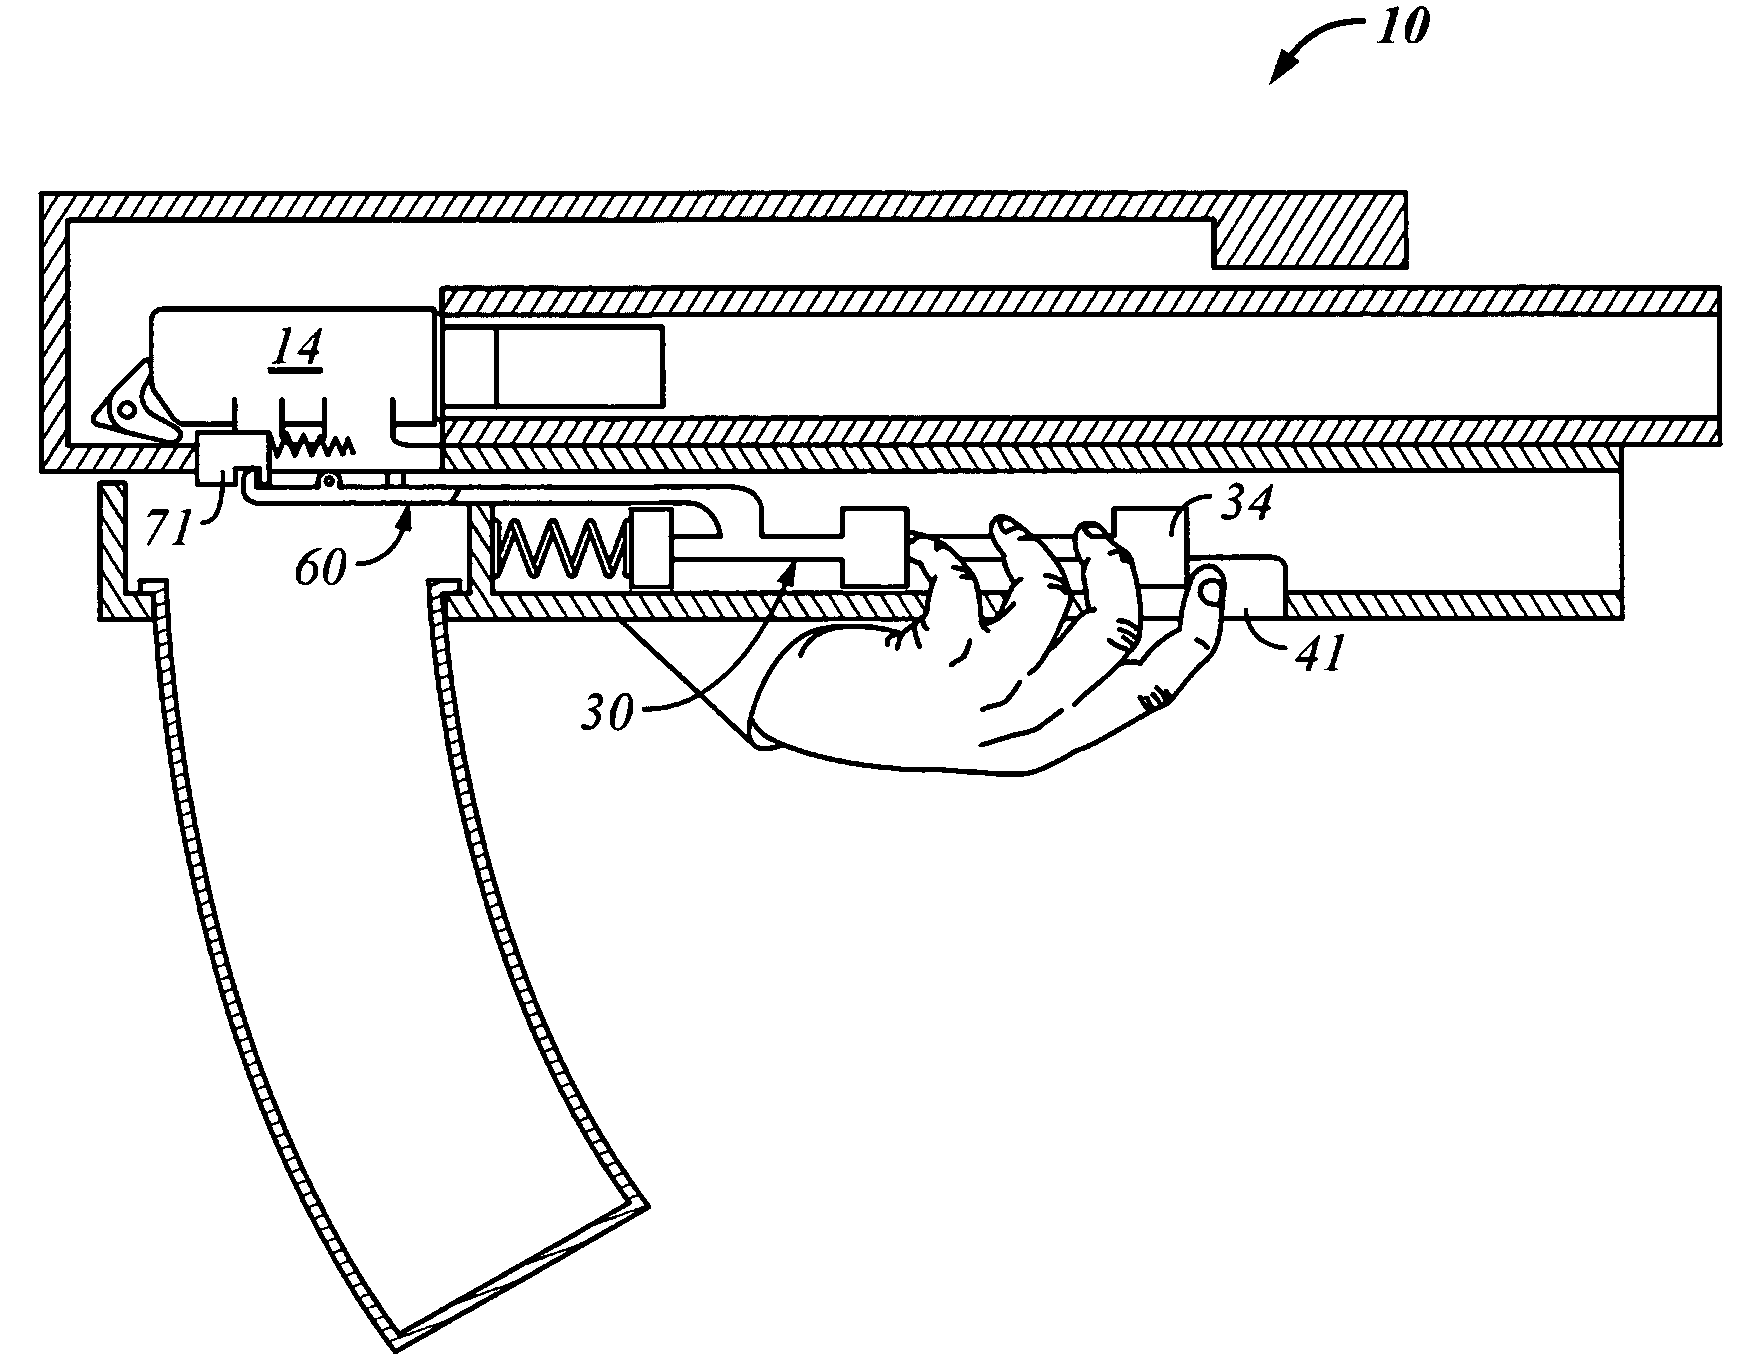 Forwardly-placed firearm fire control assembly